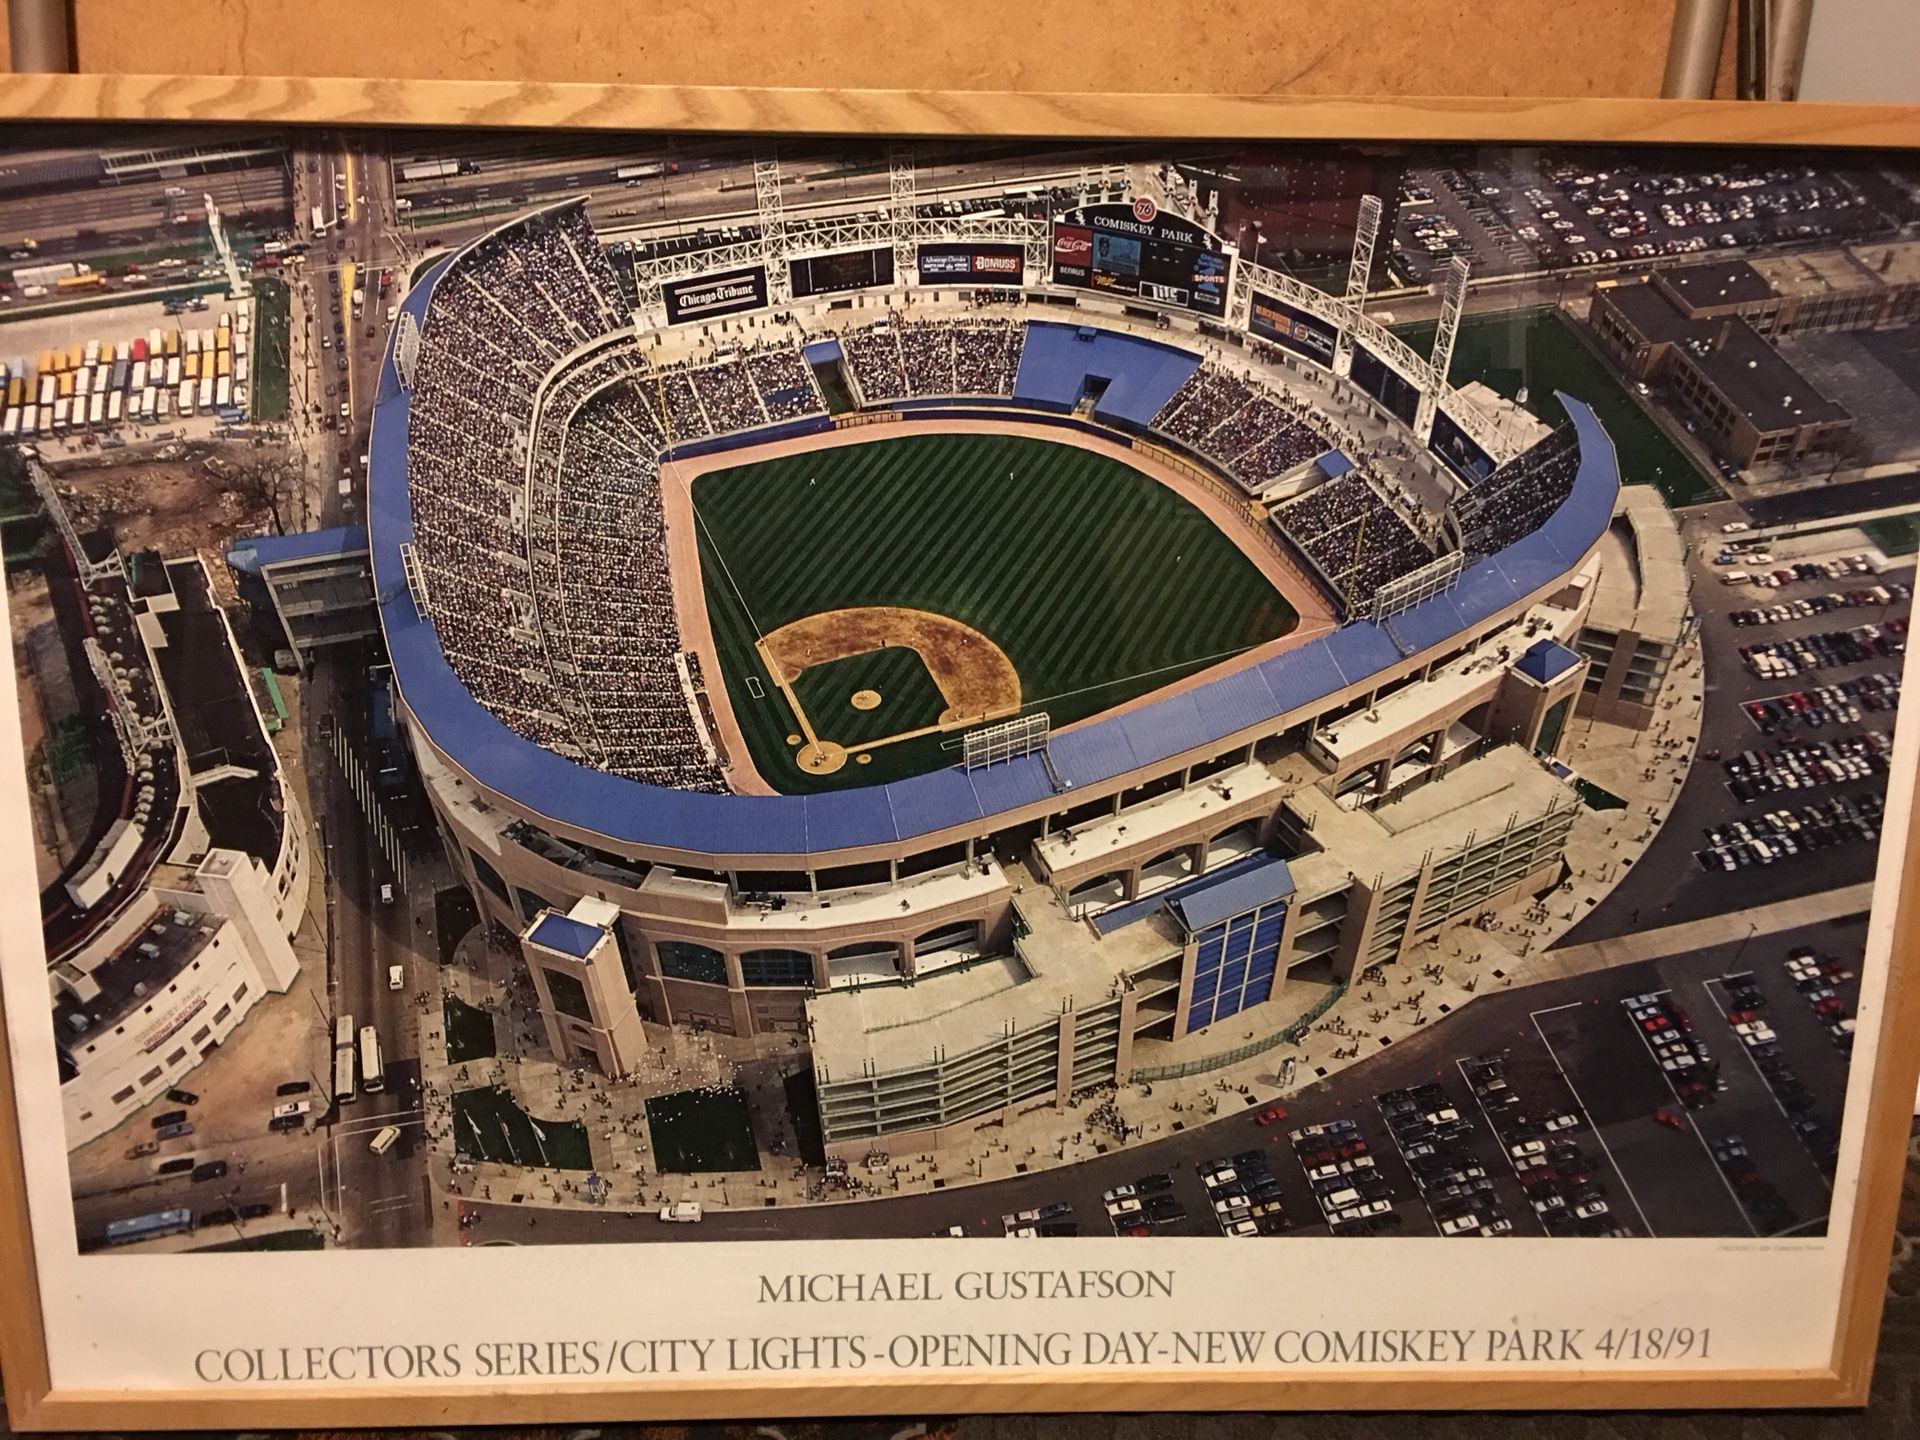 New Comiskey Park (White Sox) lithograph for Sale in Orland Park, IL -  OfferUp